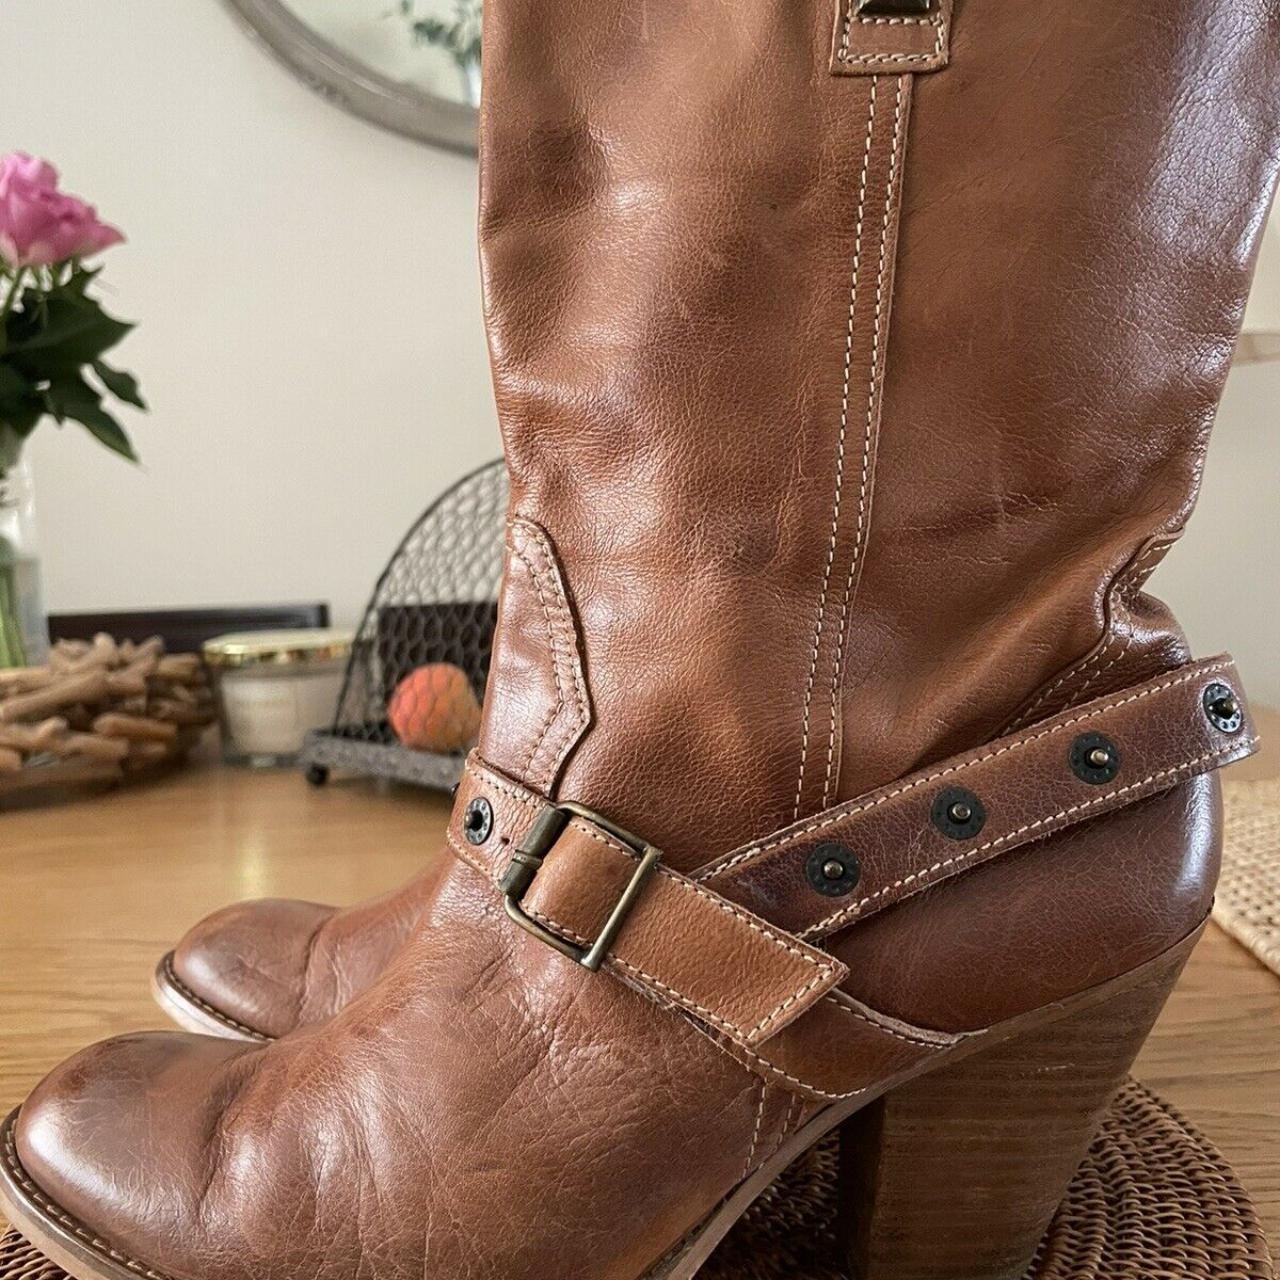 River Island Women's Tan and Brown Boots